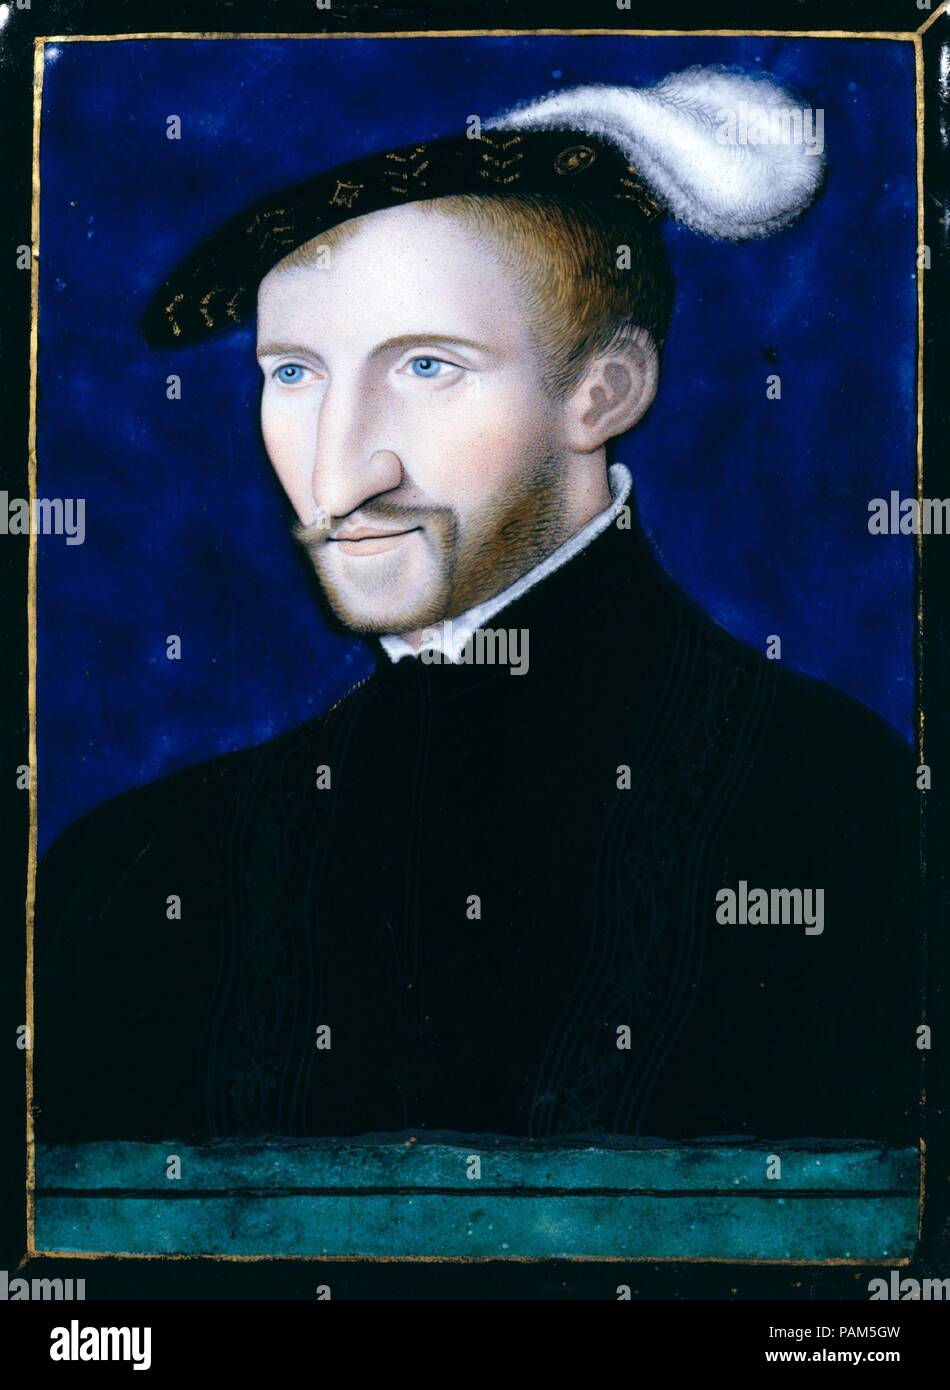 Henri d'Albret (1503-55), King of Navarre. Artist: Léonard Limosin (ca. 1505-1575/1577). Culture: French, Limoges. Dimensions: 7 1/2 x 5 5/8 in.  (19.1 x 14.3 cm). Date: 1556.  Léonard Limosin was the greatest enamel painter working in the style of the School of Fontainebleau, Italian Mannerists and French artists active at the French court from about 1530 to 1570.  Limosin's enameled portraits are numerous, and he has been ranked, along with Jean Clouet (1486-1540) and Corneille de Lyon (before 1500-1574), as the best portrait painter of Renaissance France.  This plaque, one of at least six b Stock Photo